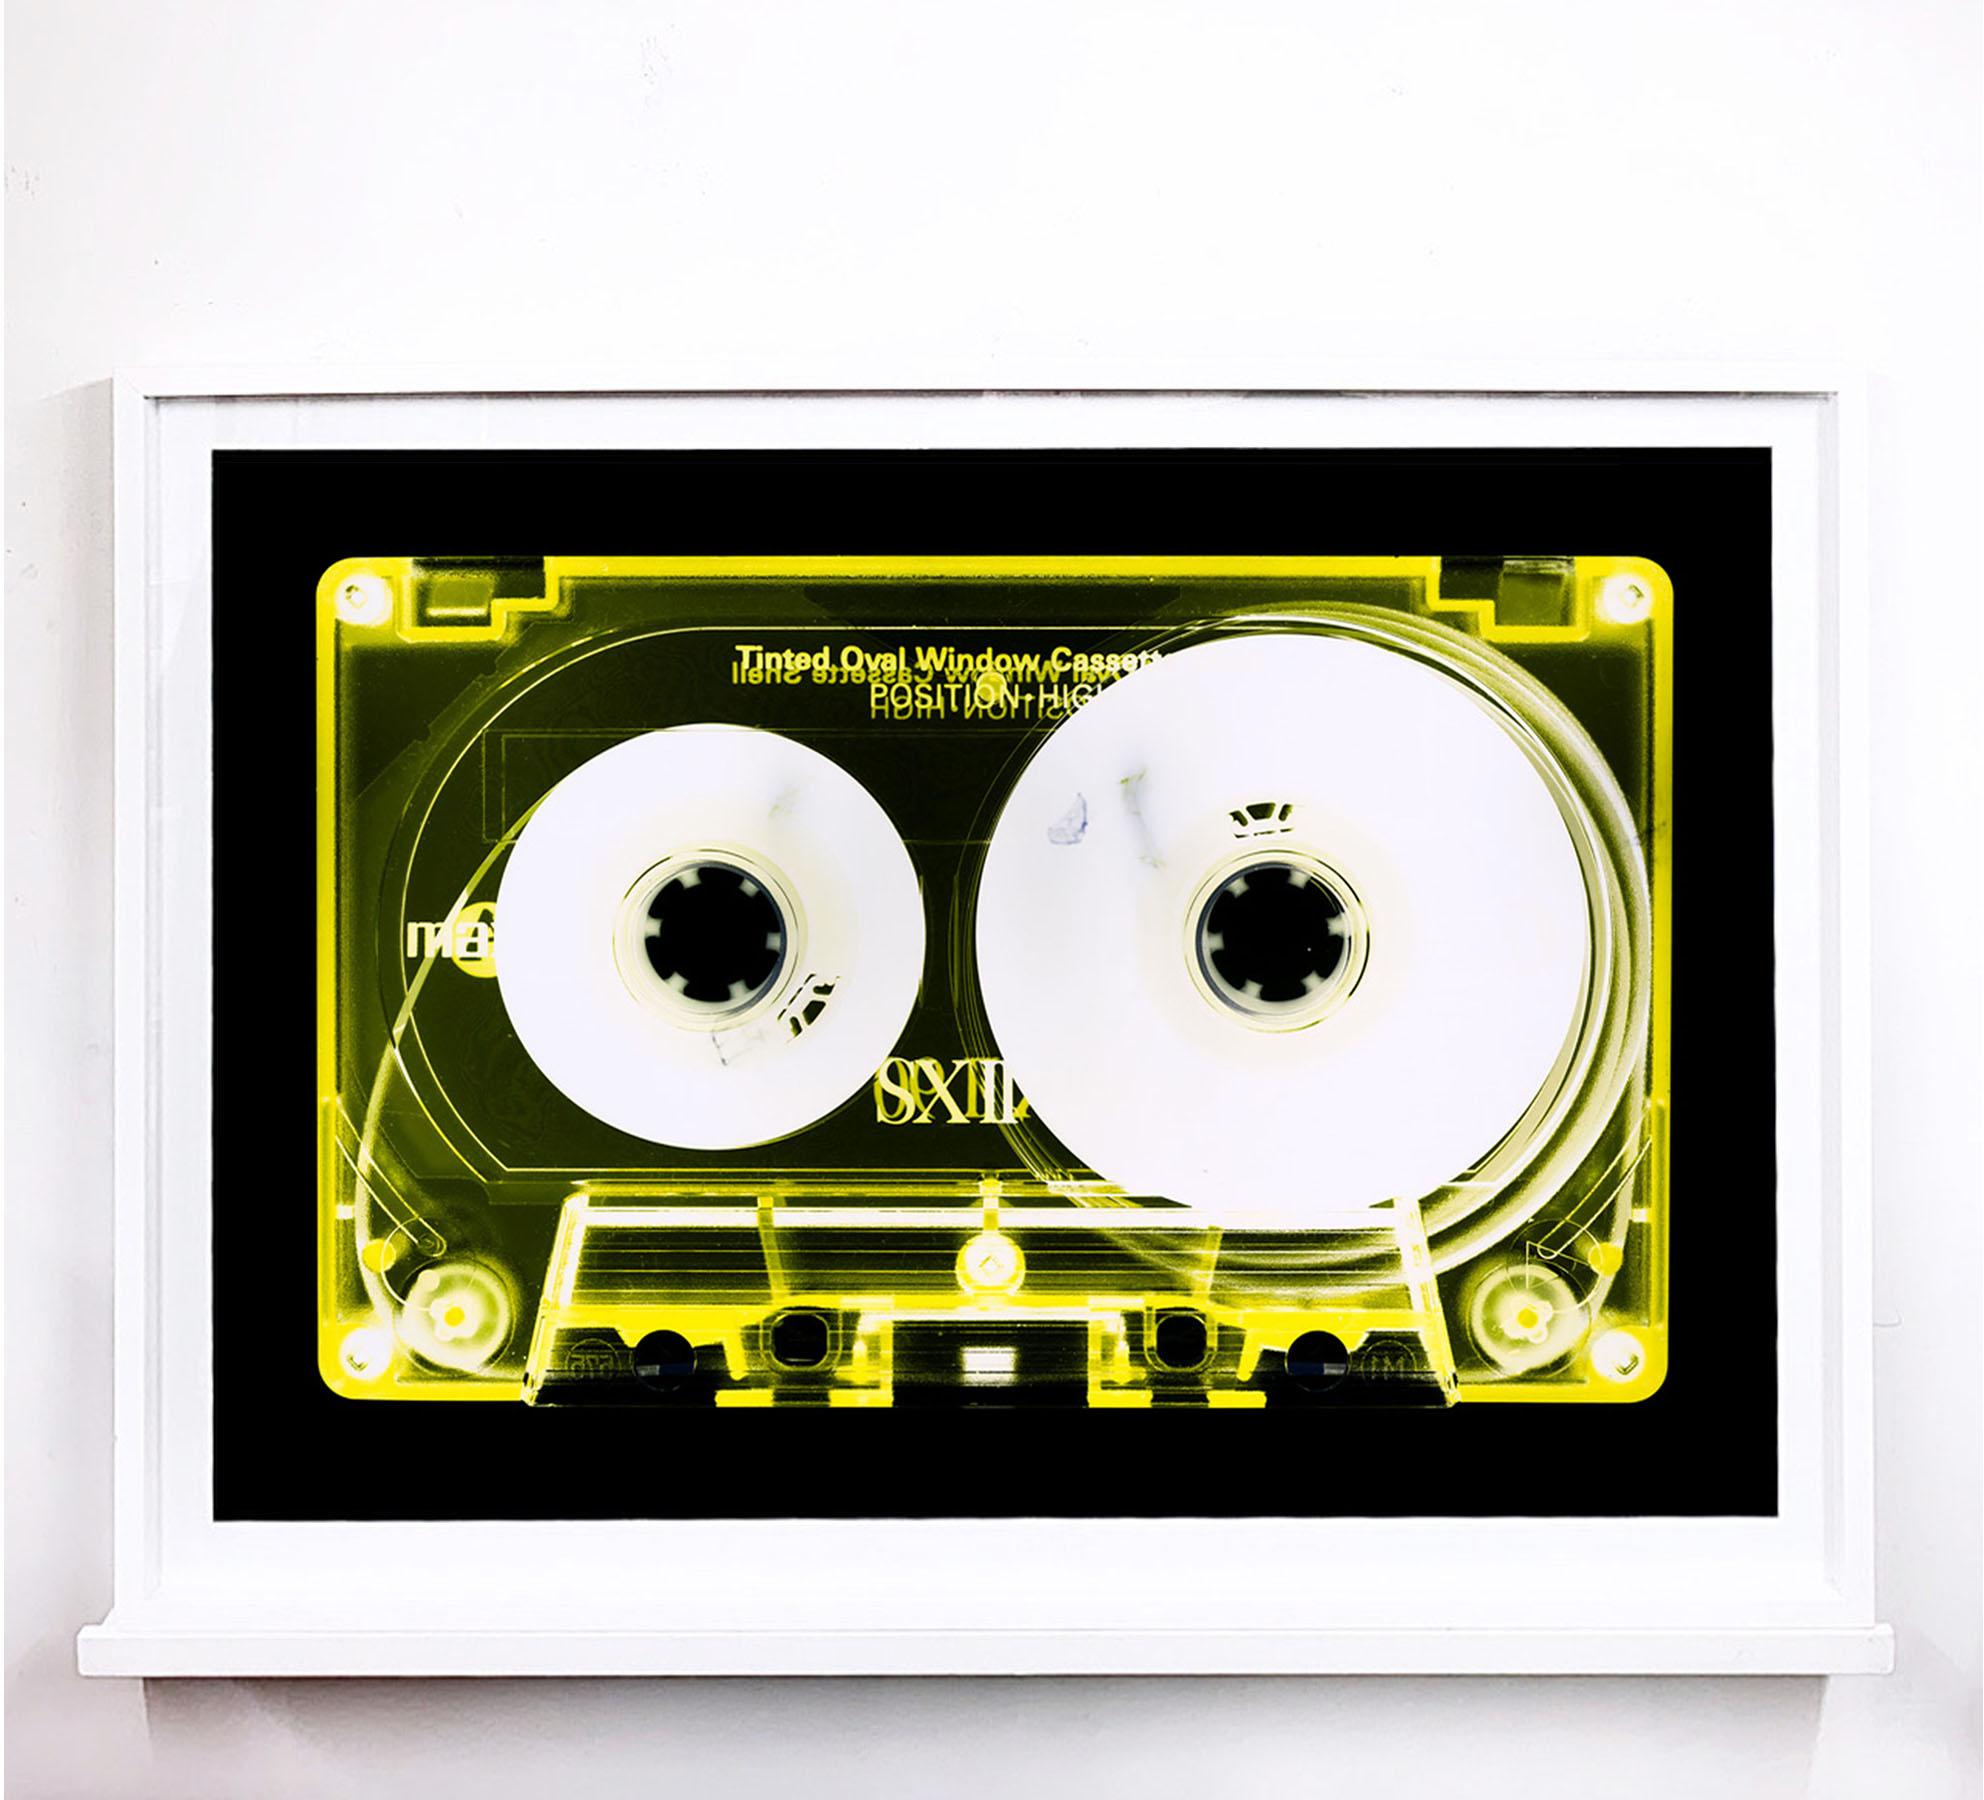 Tape Collection - Yellow Tinted Cassette - Conceptual Color Music Art - Pop Art Photograph by Heidler & Heeps